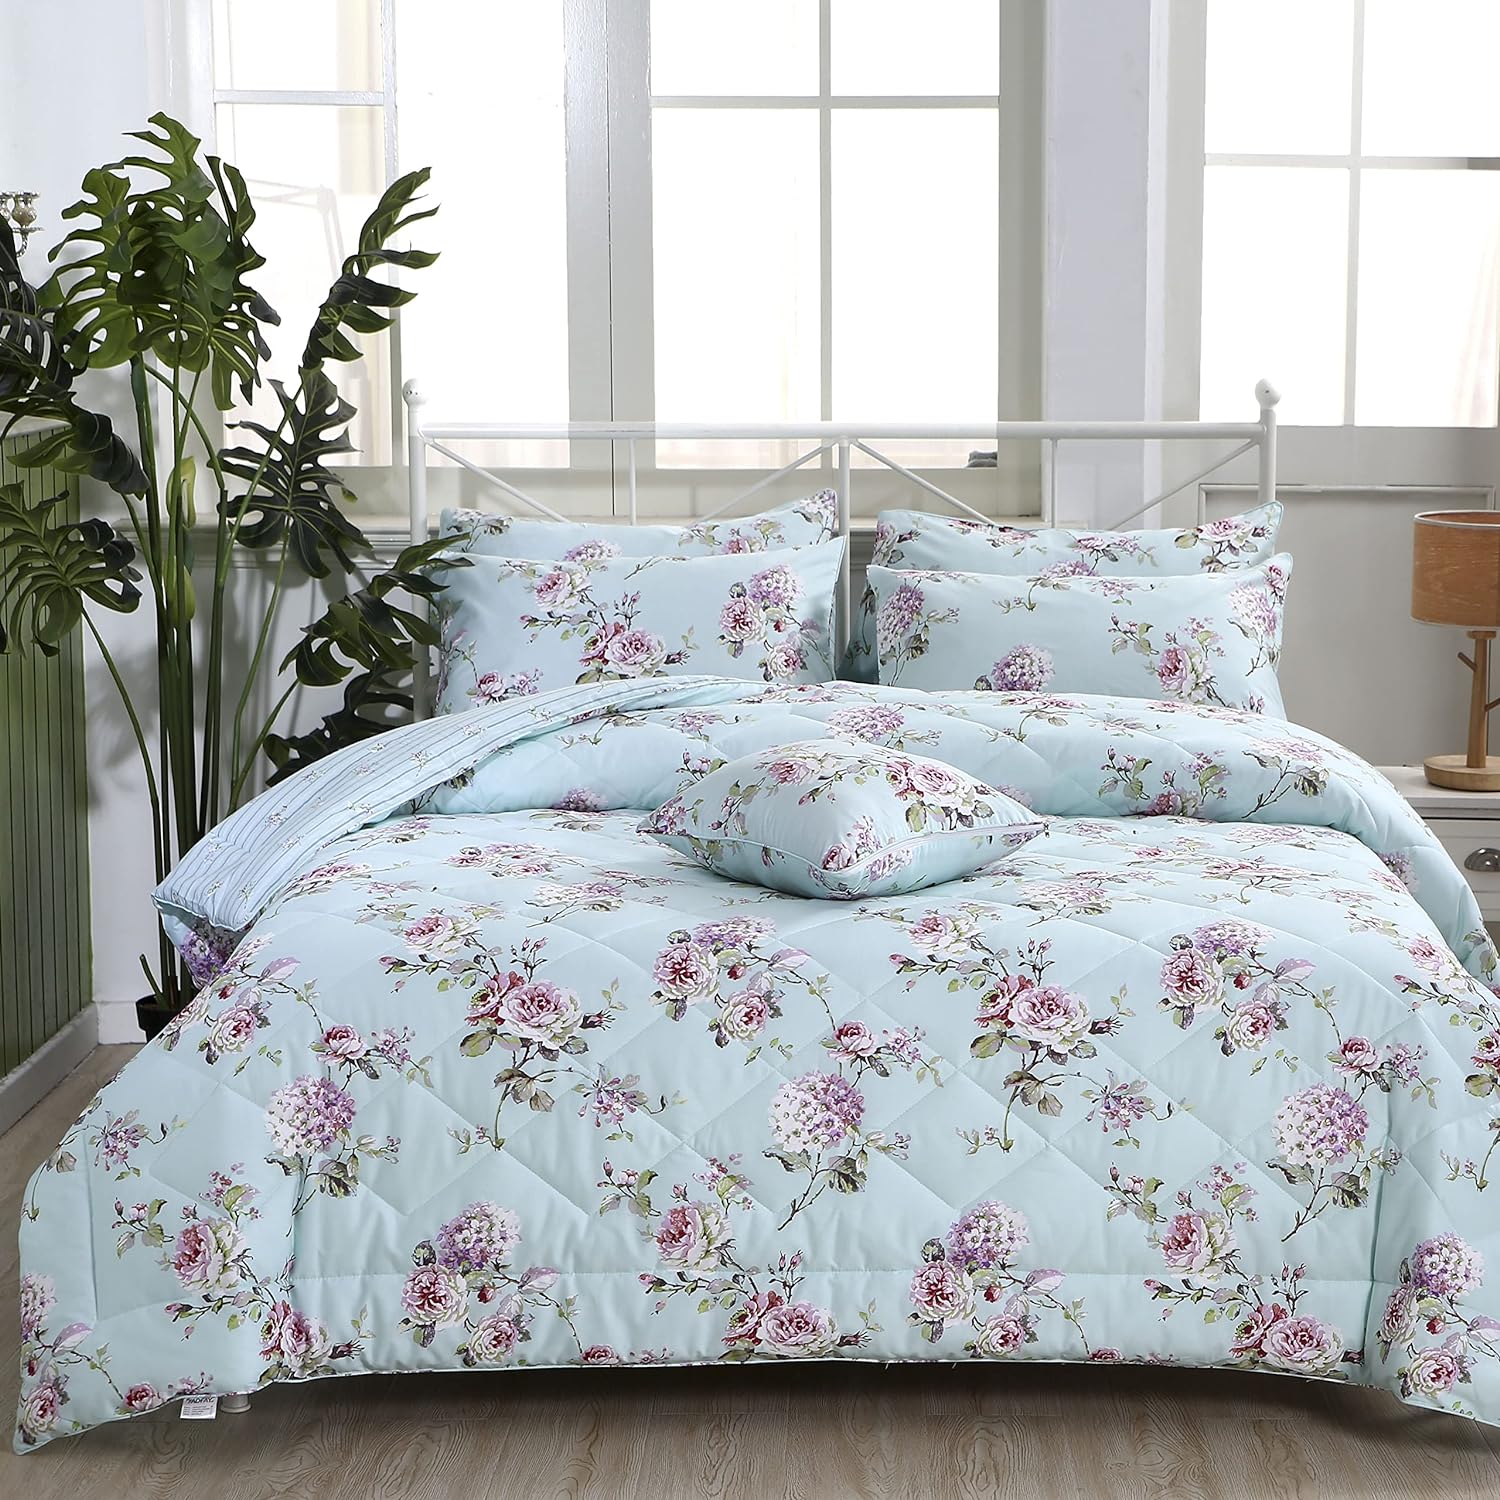 FADFAY Queen Comforter Set Blue Floral Lightweight Reversible Striped 100% Cotton Down Alternative Bed Comforter Soft Microfiber Fill Bedding Farmhouse Purple Flower & Green Leaves Printed 3 Pcs